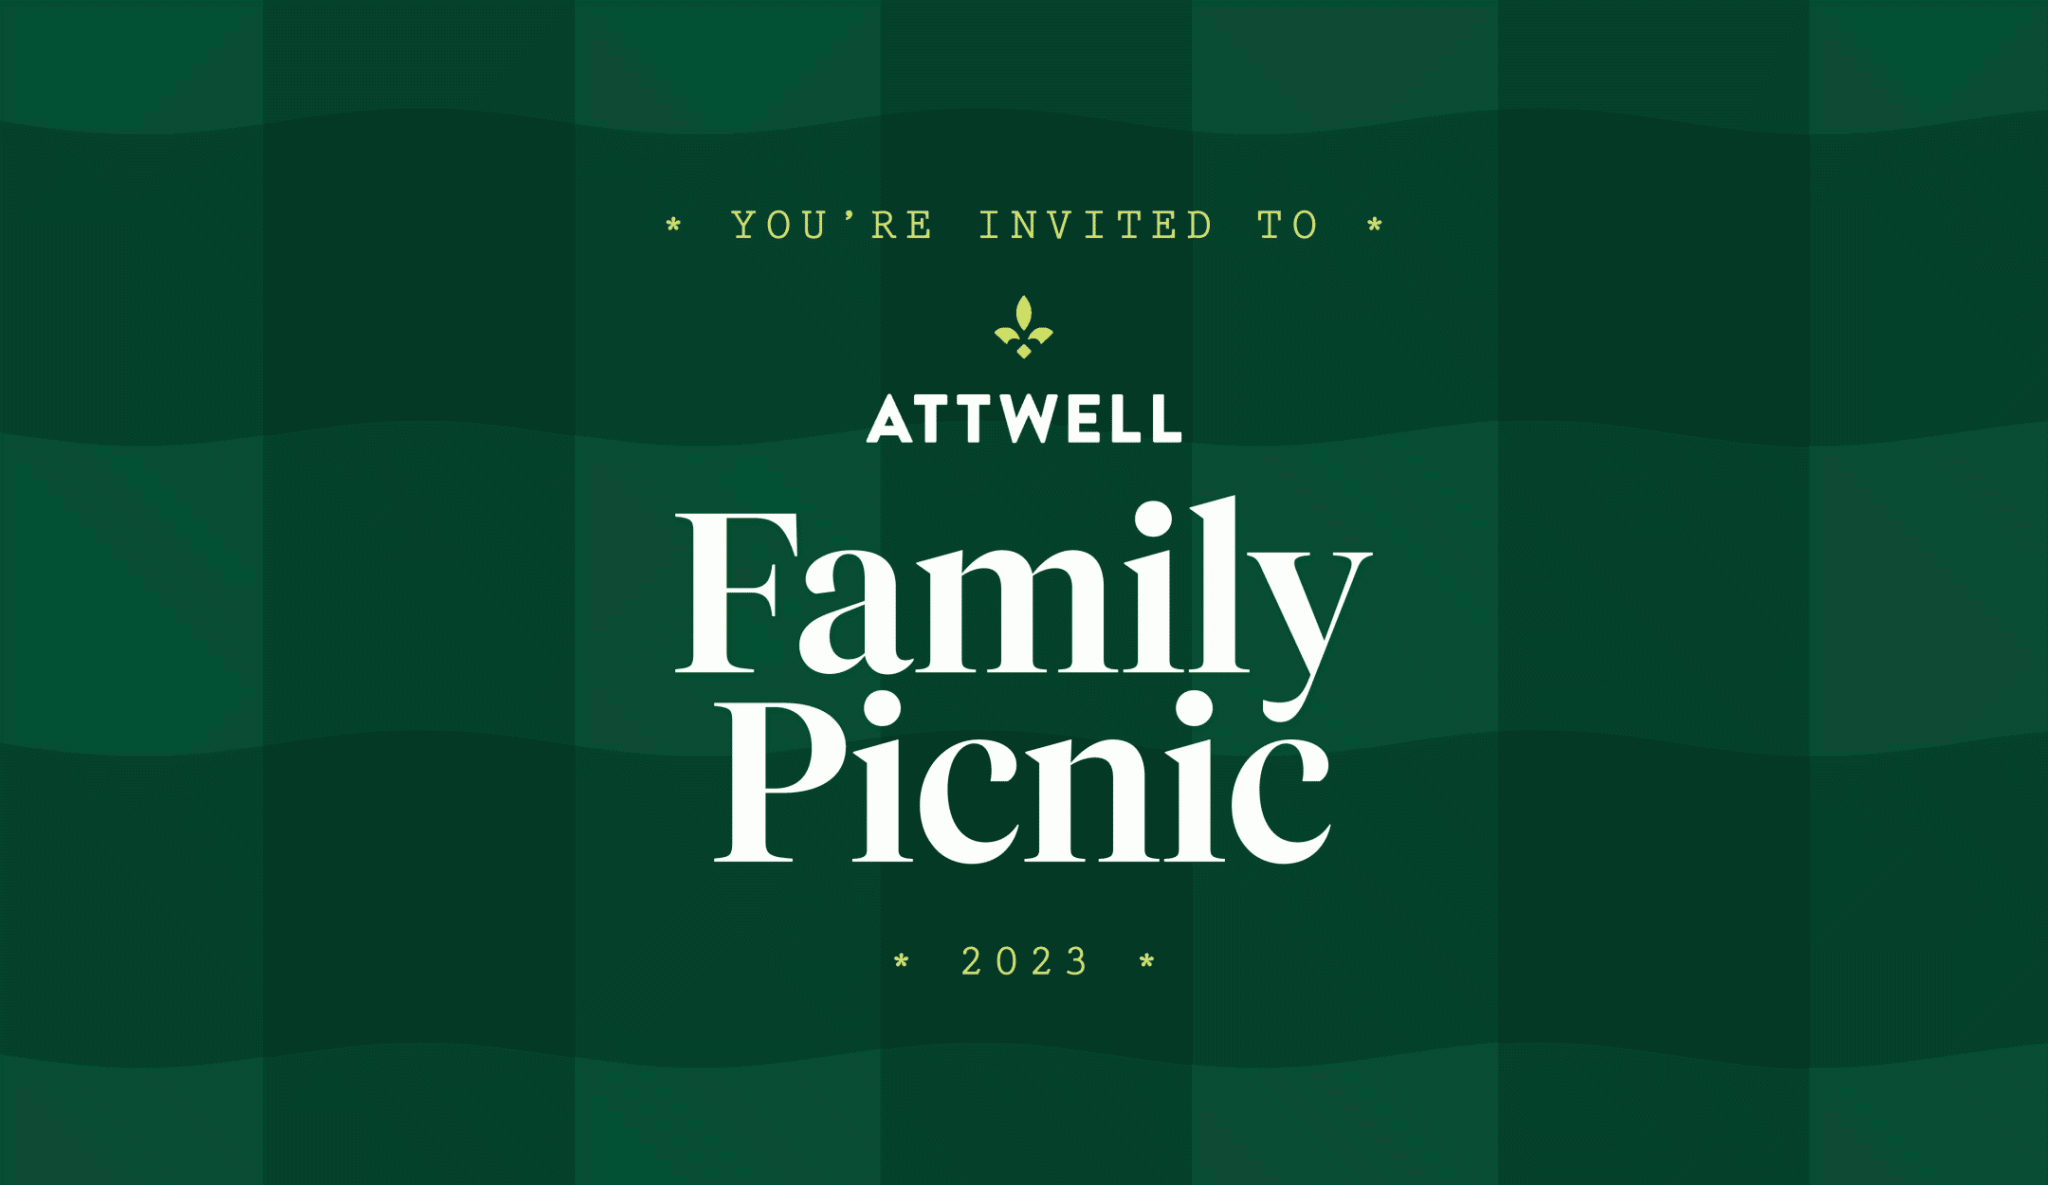 Attwell Family Picnic Day!